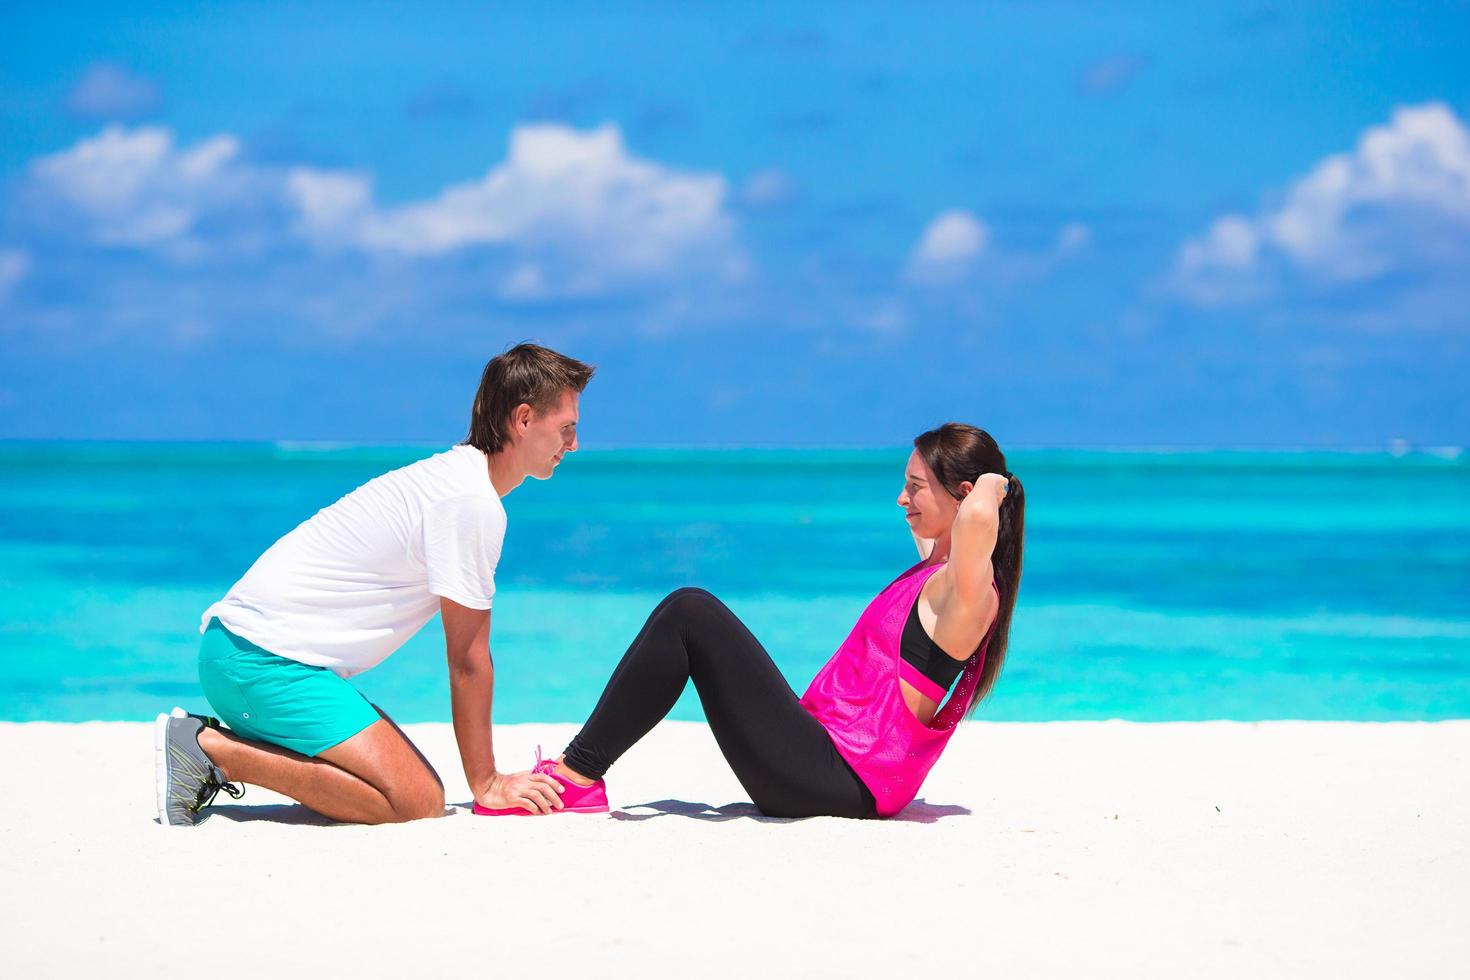 Man spotting woman while doing crunches on a beach photo